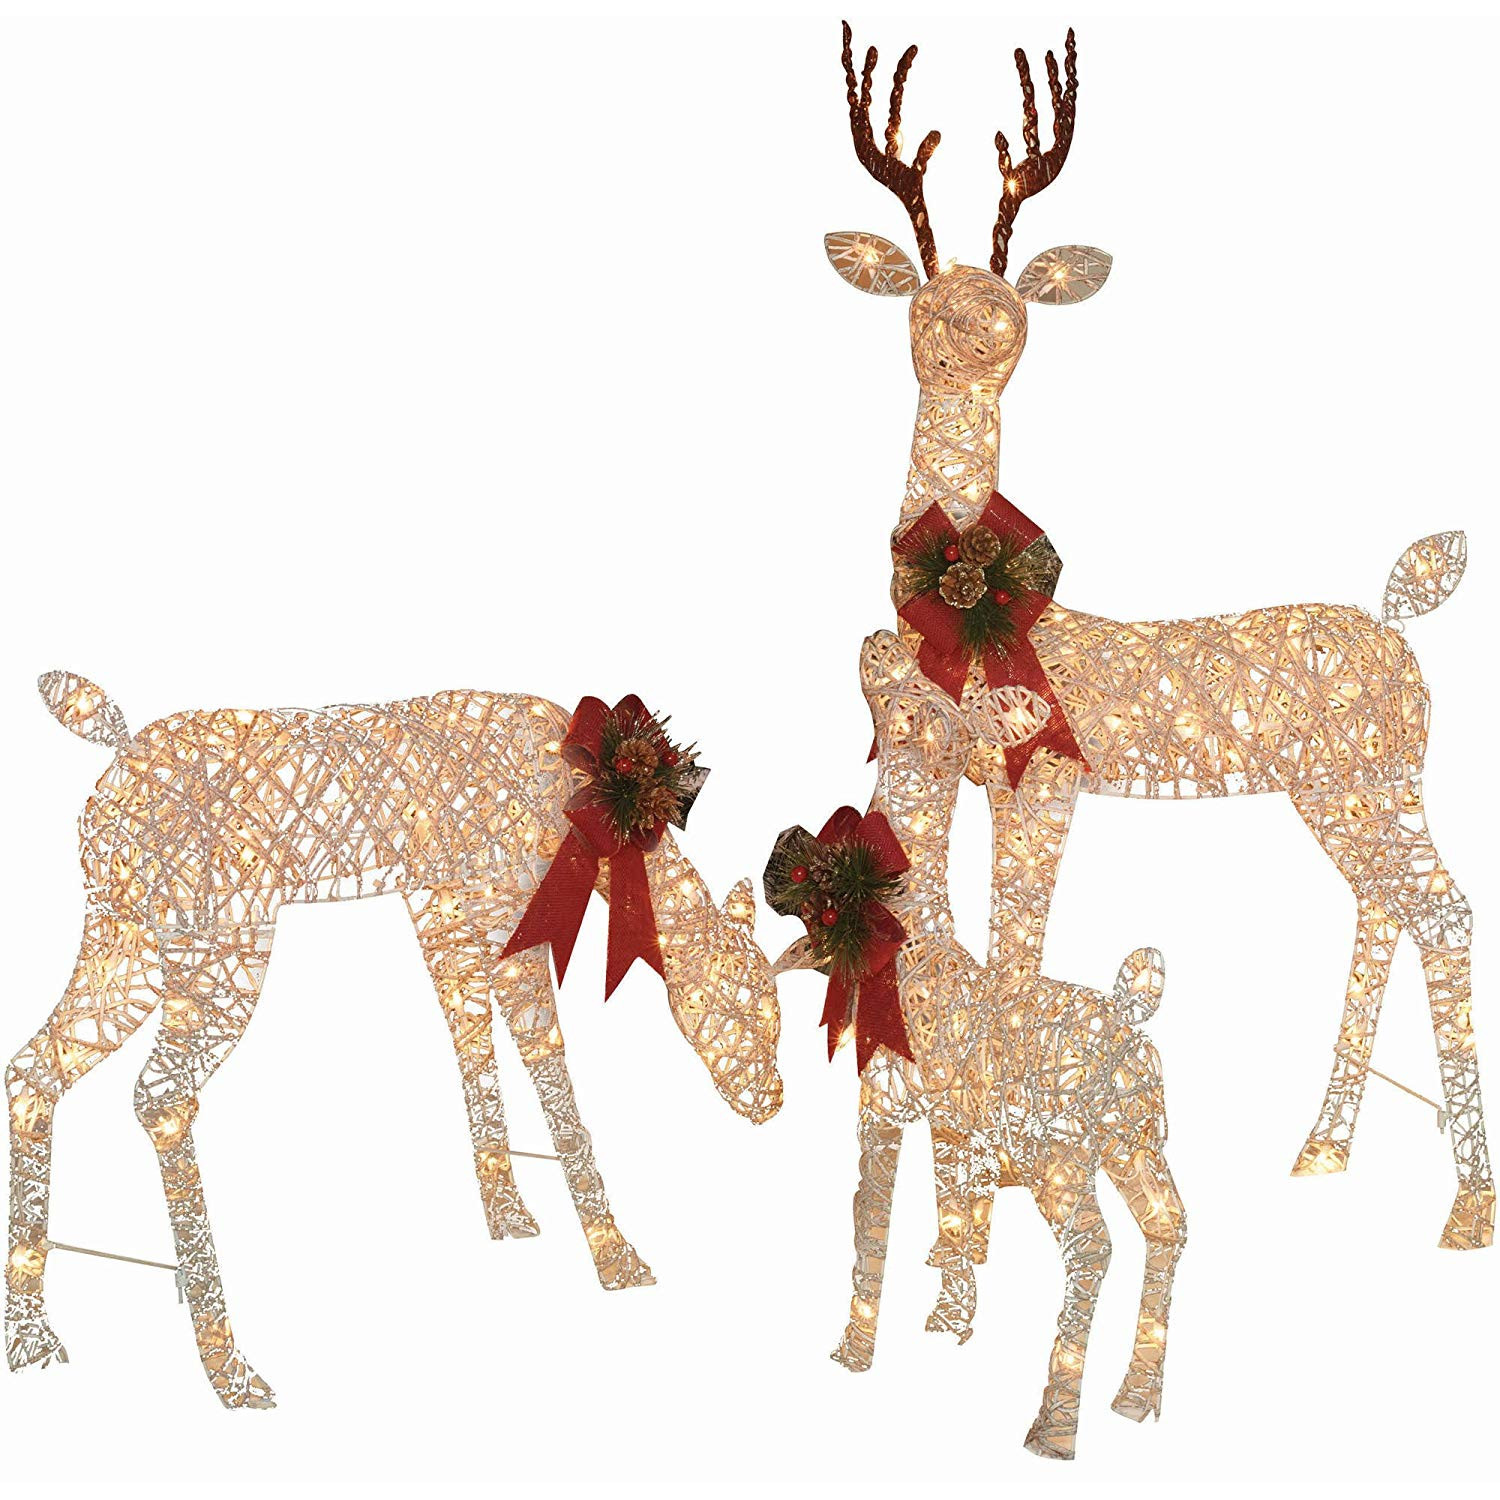 Christmas Deer Decor
 lighted outdoor deer for christmas decorations